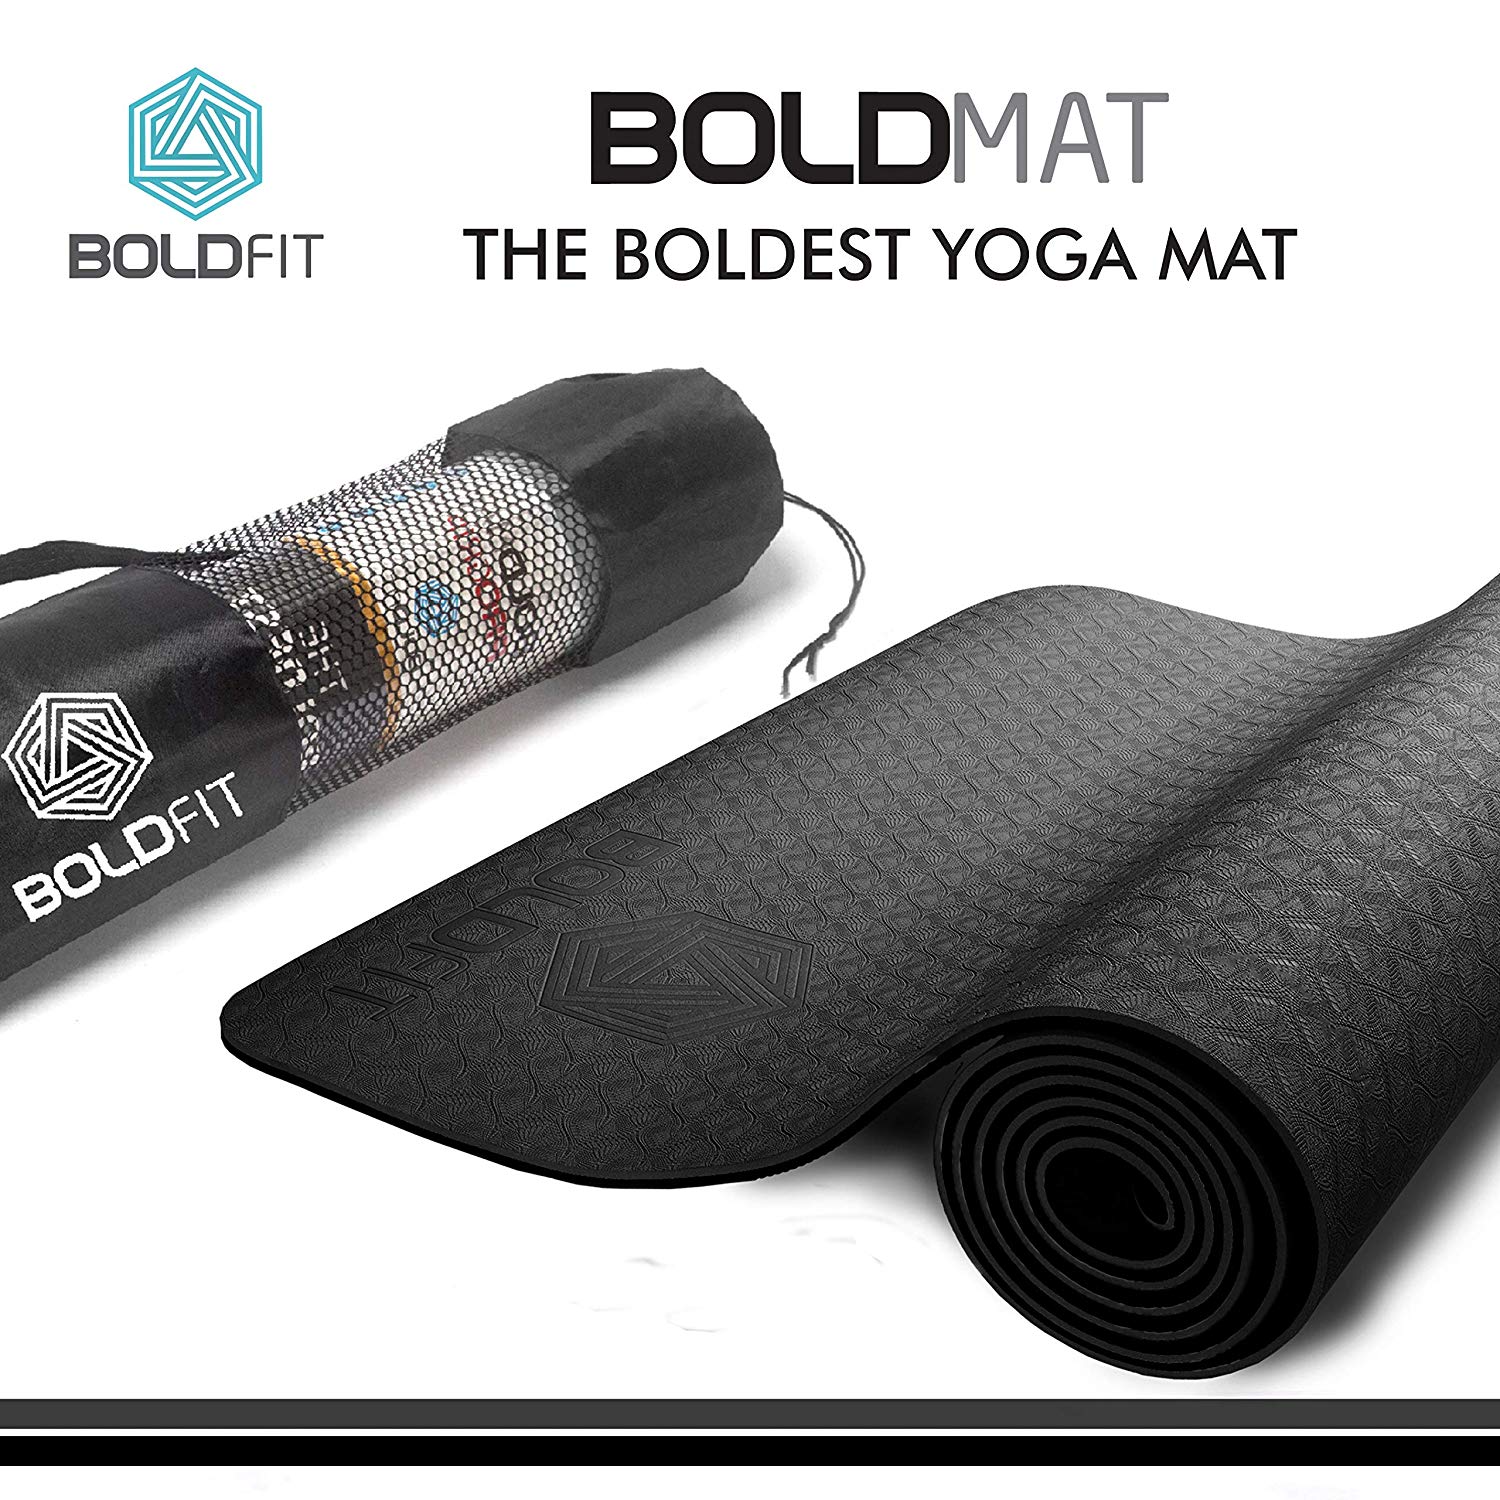 Boldfit Pro-Grip Luxury TPE Yoga mat with Carrying Bag